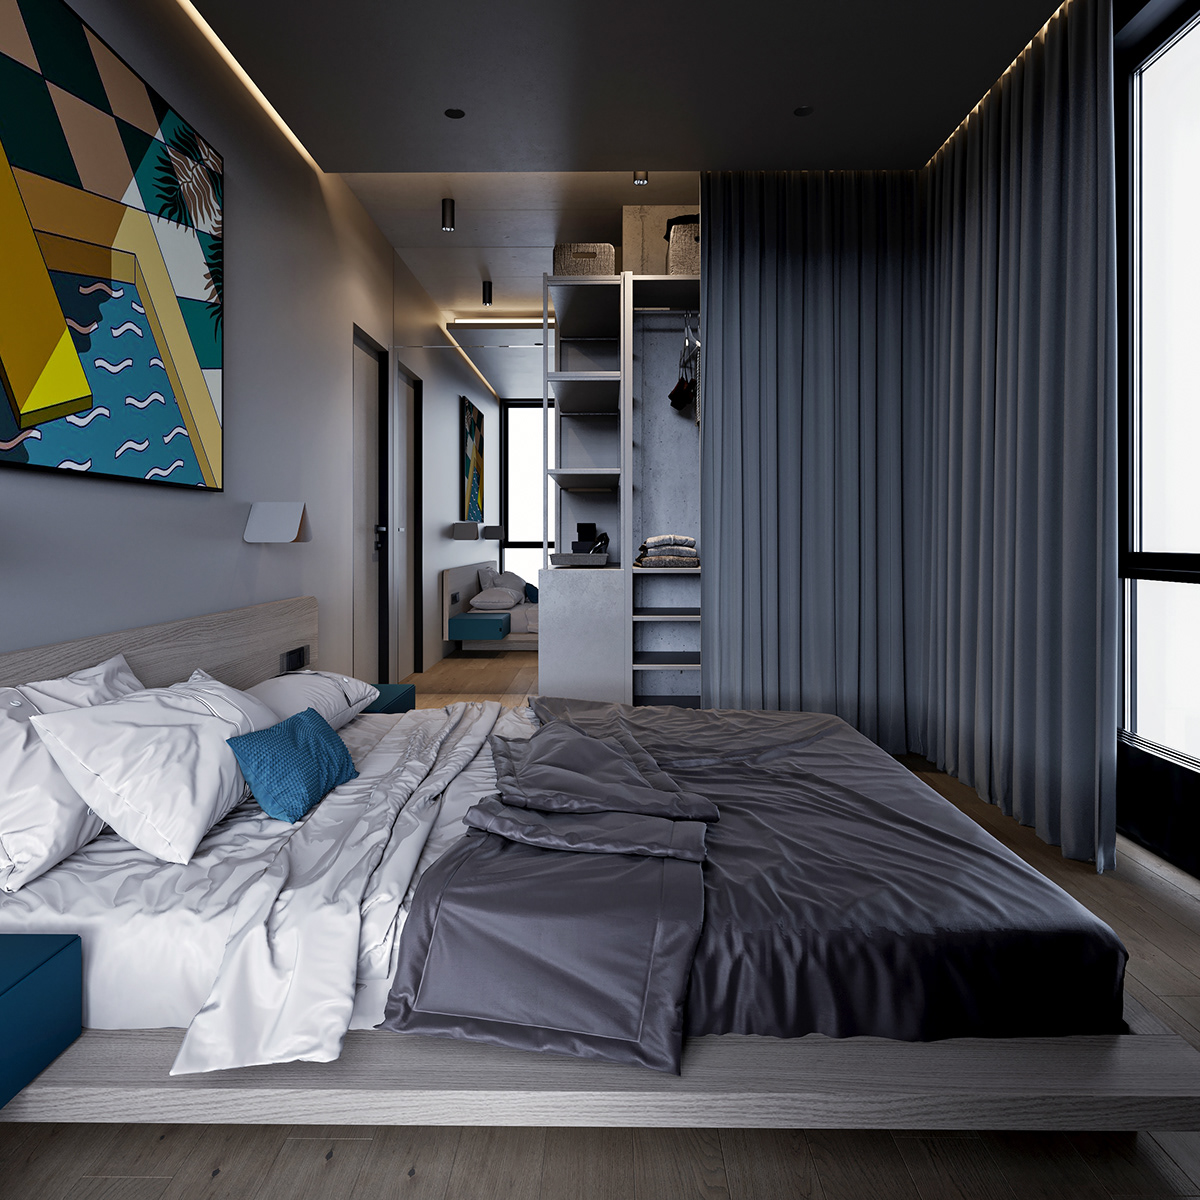 The main colors of white, gray, and blue are peacefully combined in the bedroom, making the space light, elegant, and full of life.